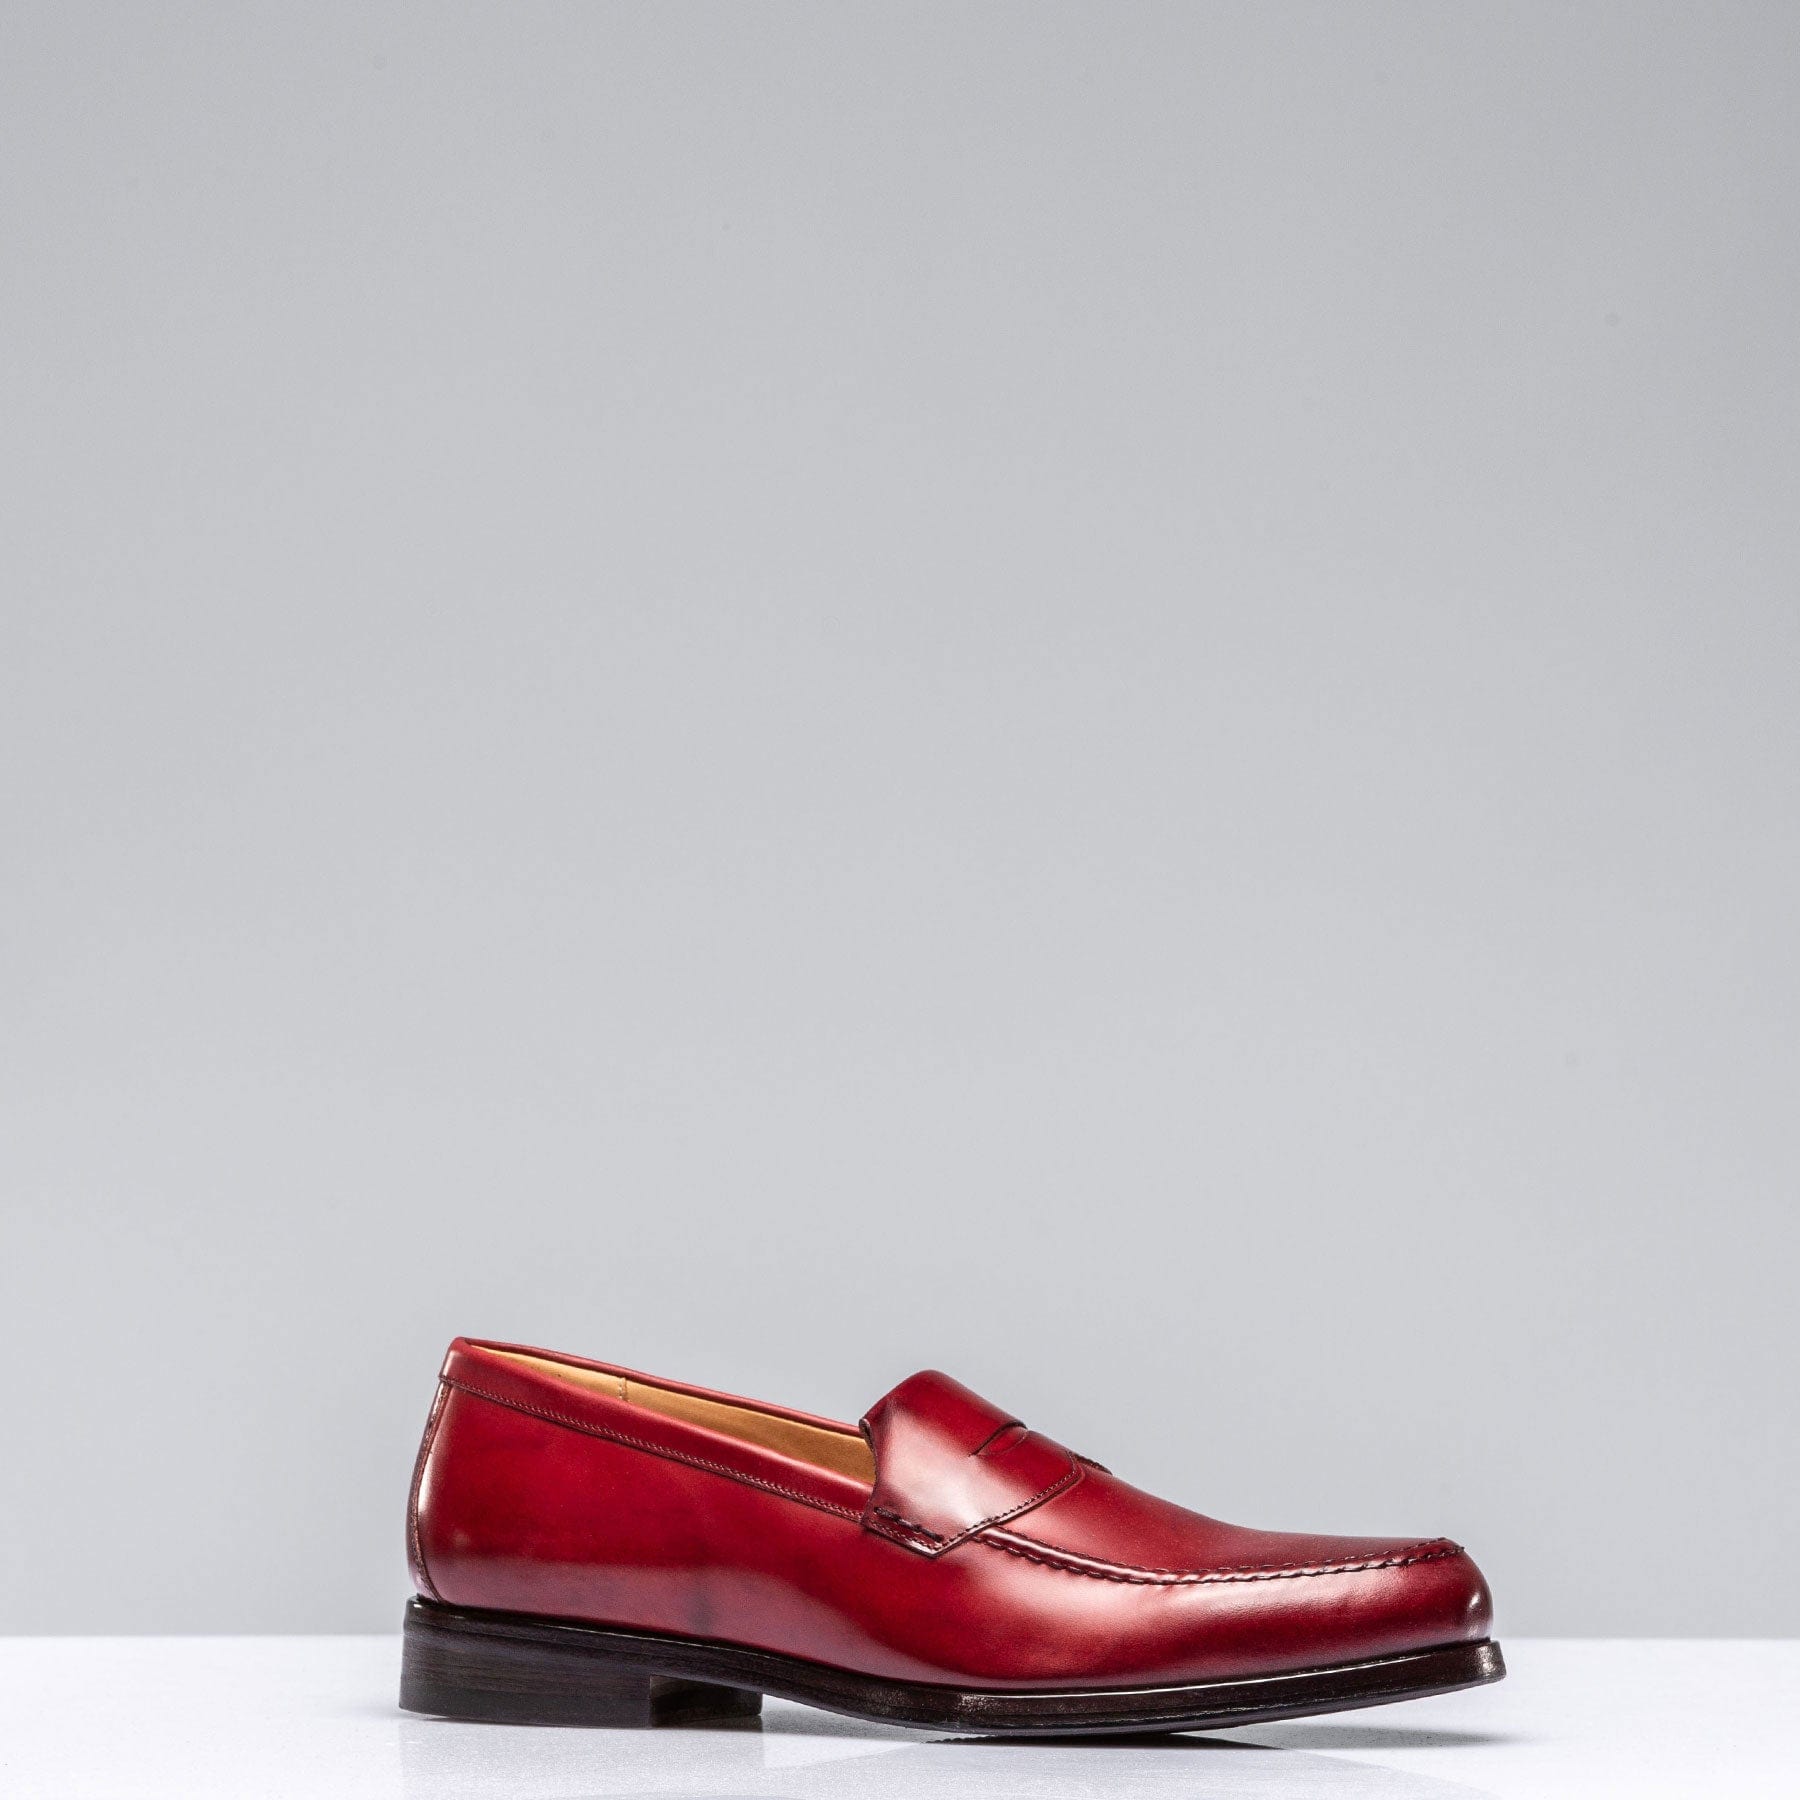 Lucro Loafer In Cherry Antique - AXEL'S